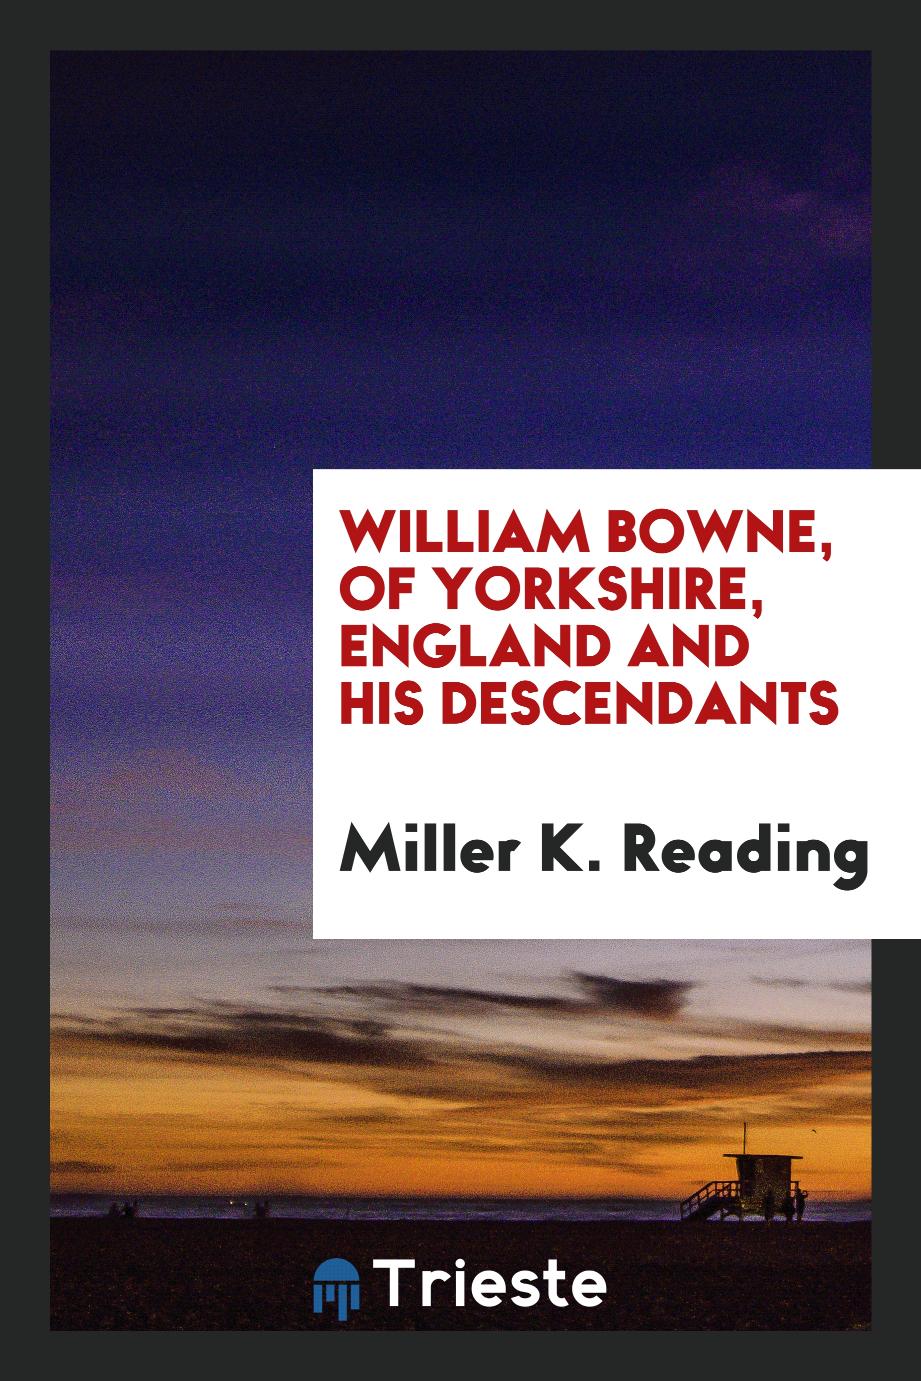 Miller K. Reading - William Bowne, of Yorkshire, England and His Descendants